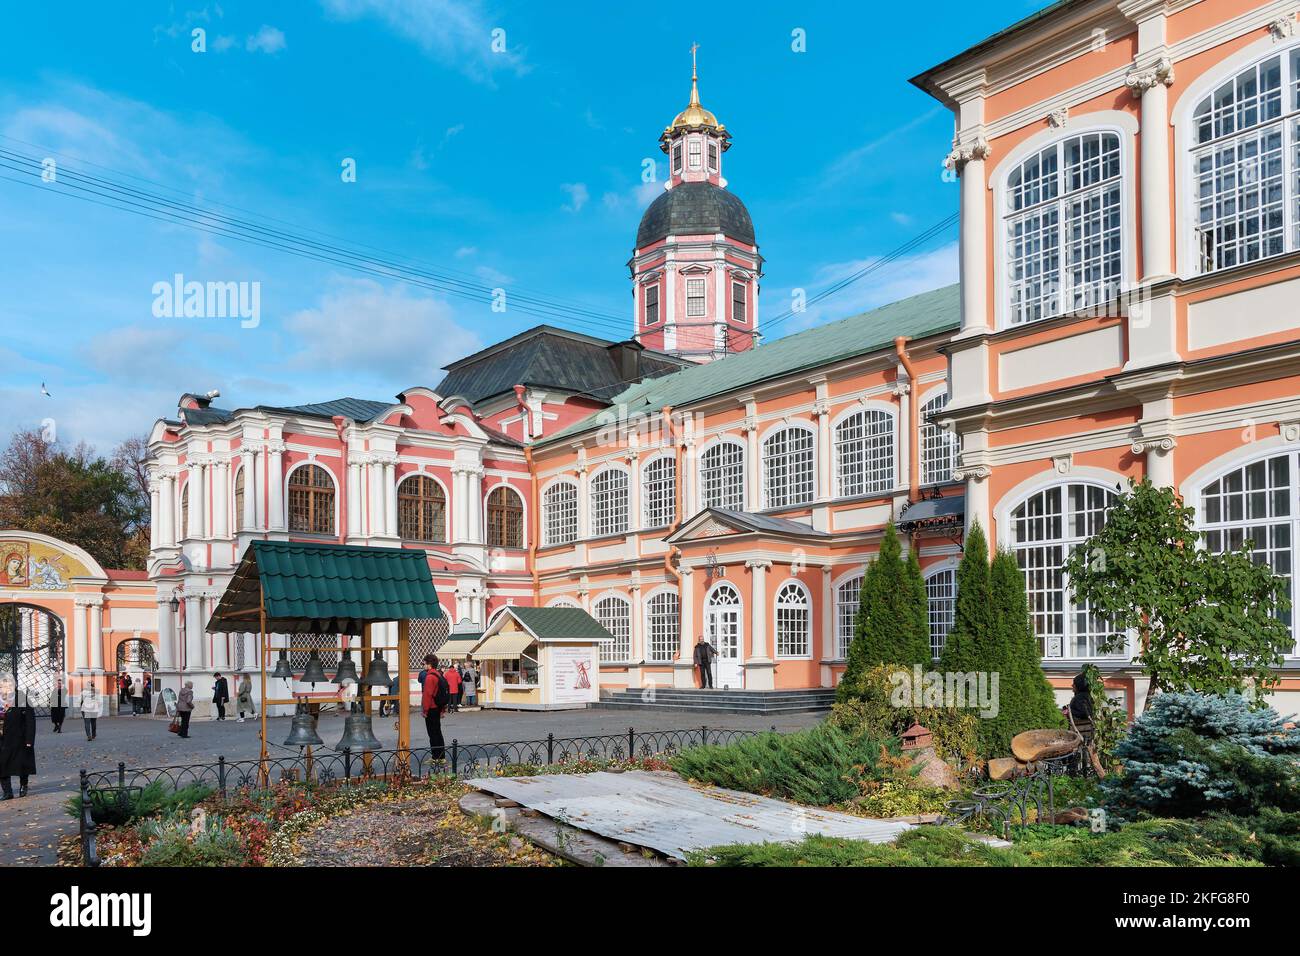 The inner courtyard of the Holy Trinity Alexander Nevsky Lavra with a view of the dome of the Church of the Annunciation, landmark: St. Petersburg, Ru Stock Photo